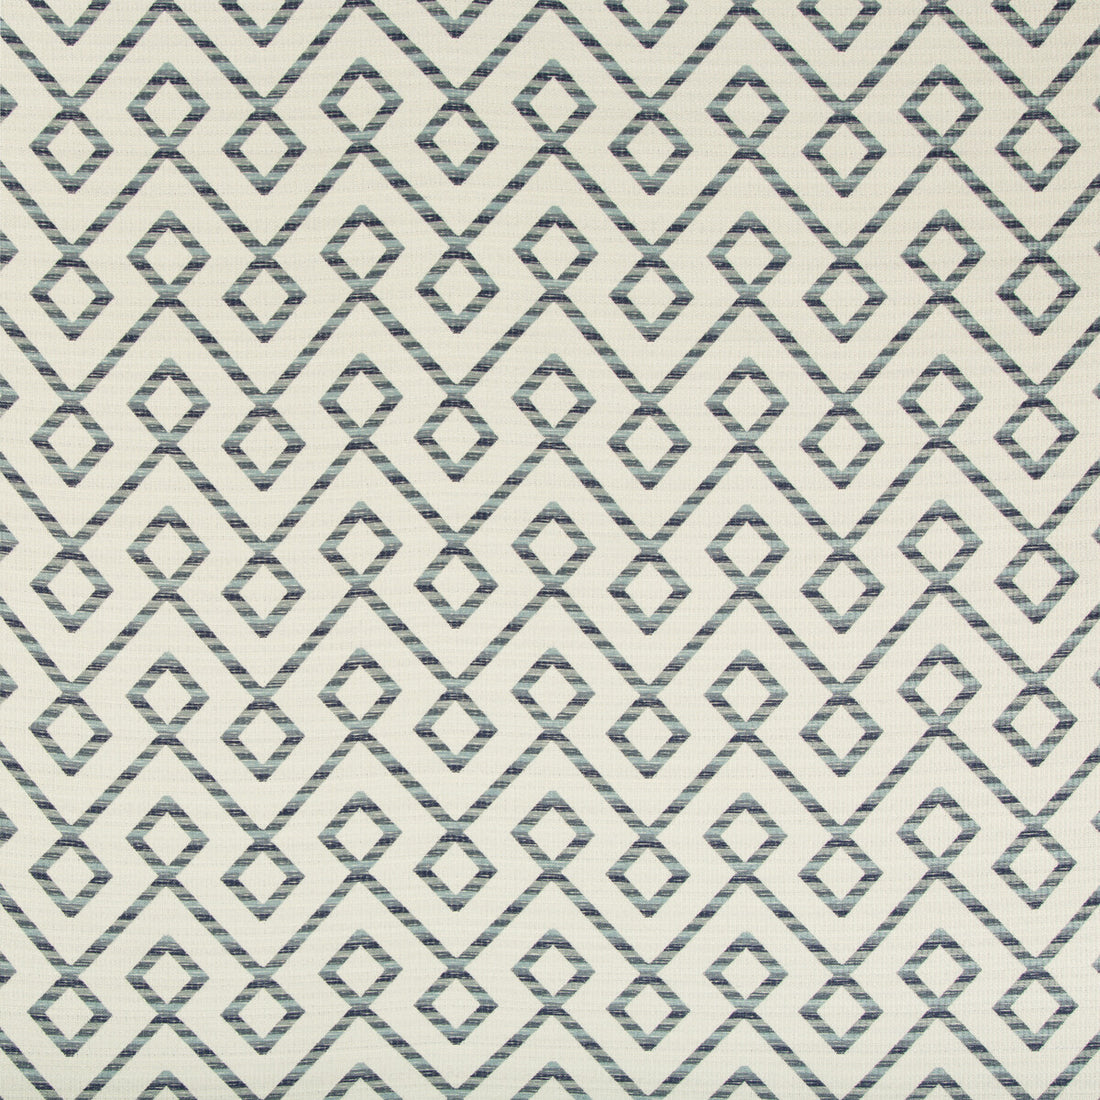 Kravet Design fabric in 34708-1615 color - pattern 34708.1615.0 - by Kravet Design in the Performance Crypton Home collection